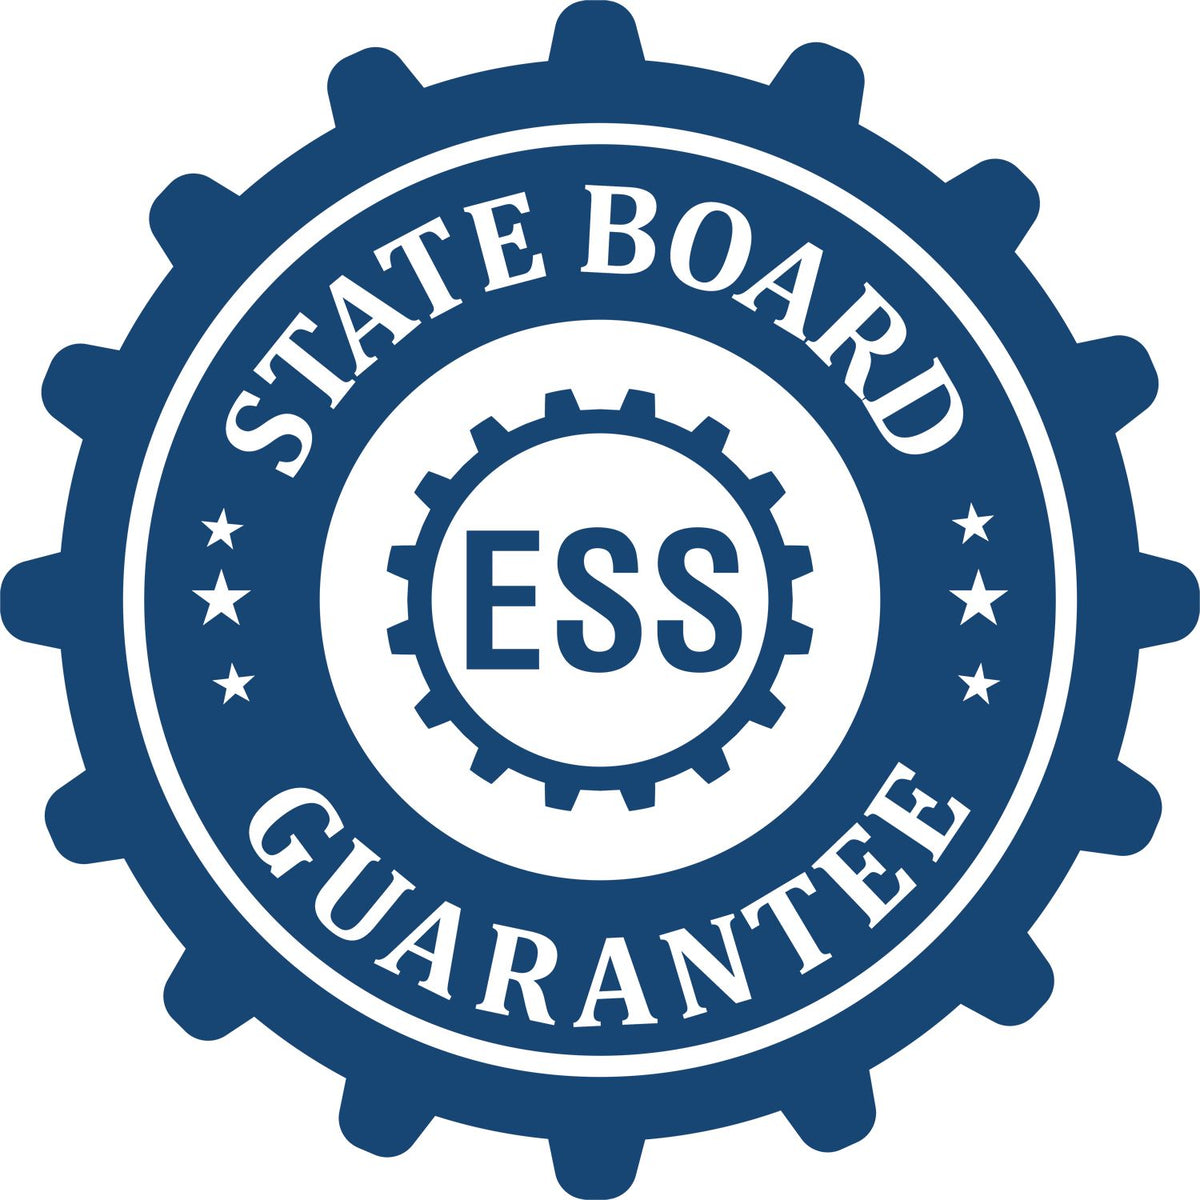 An emblem in a gear shape illustrating a state board guarantee for the State of Wisconsin Extended Long Reach Geologist Seal